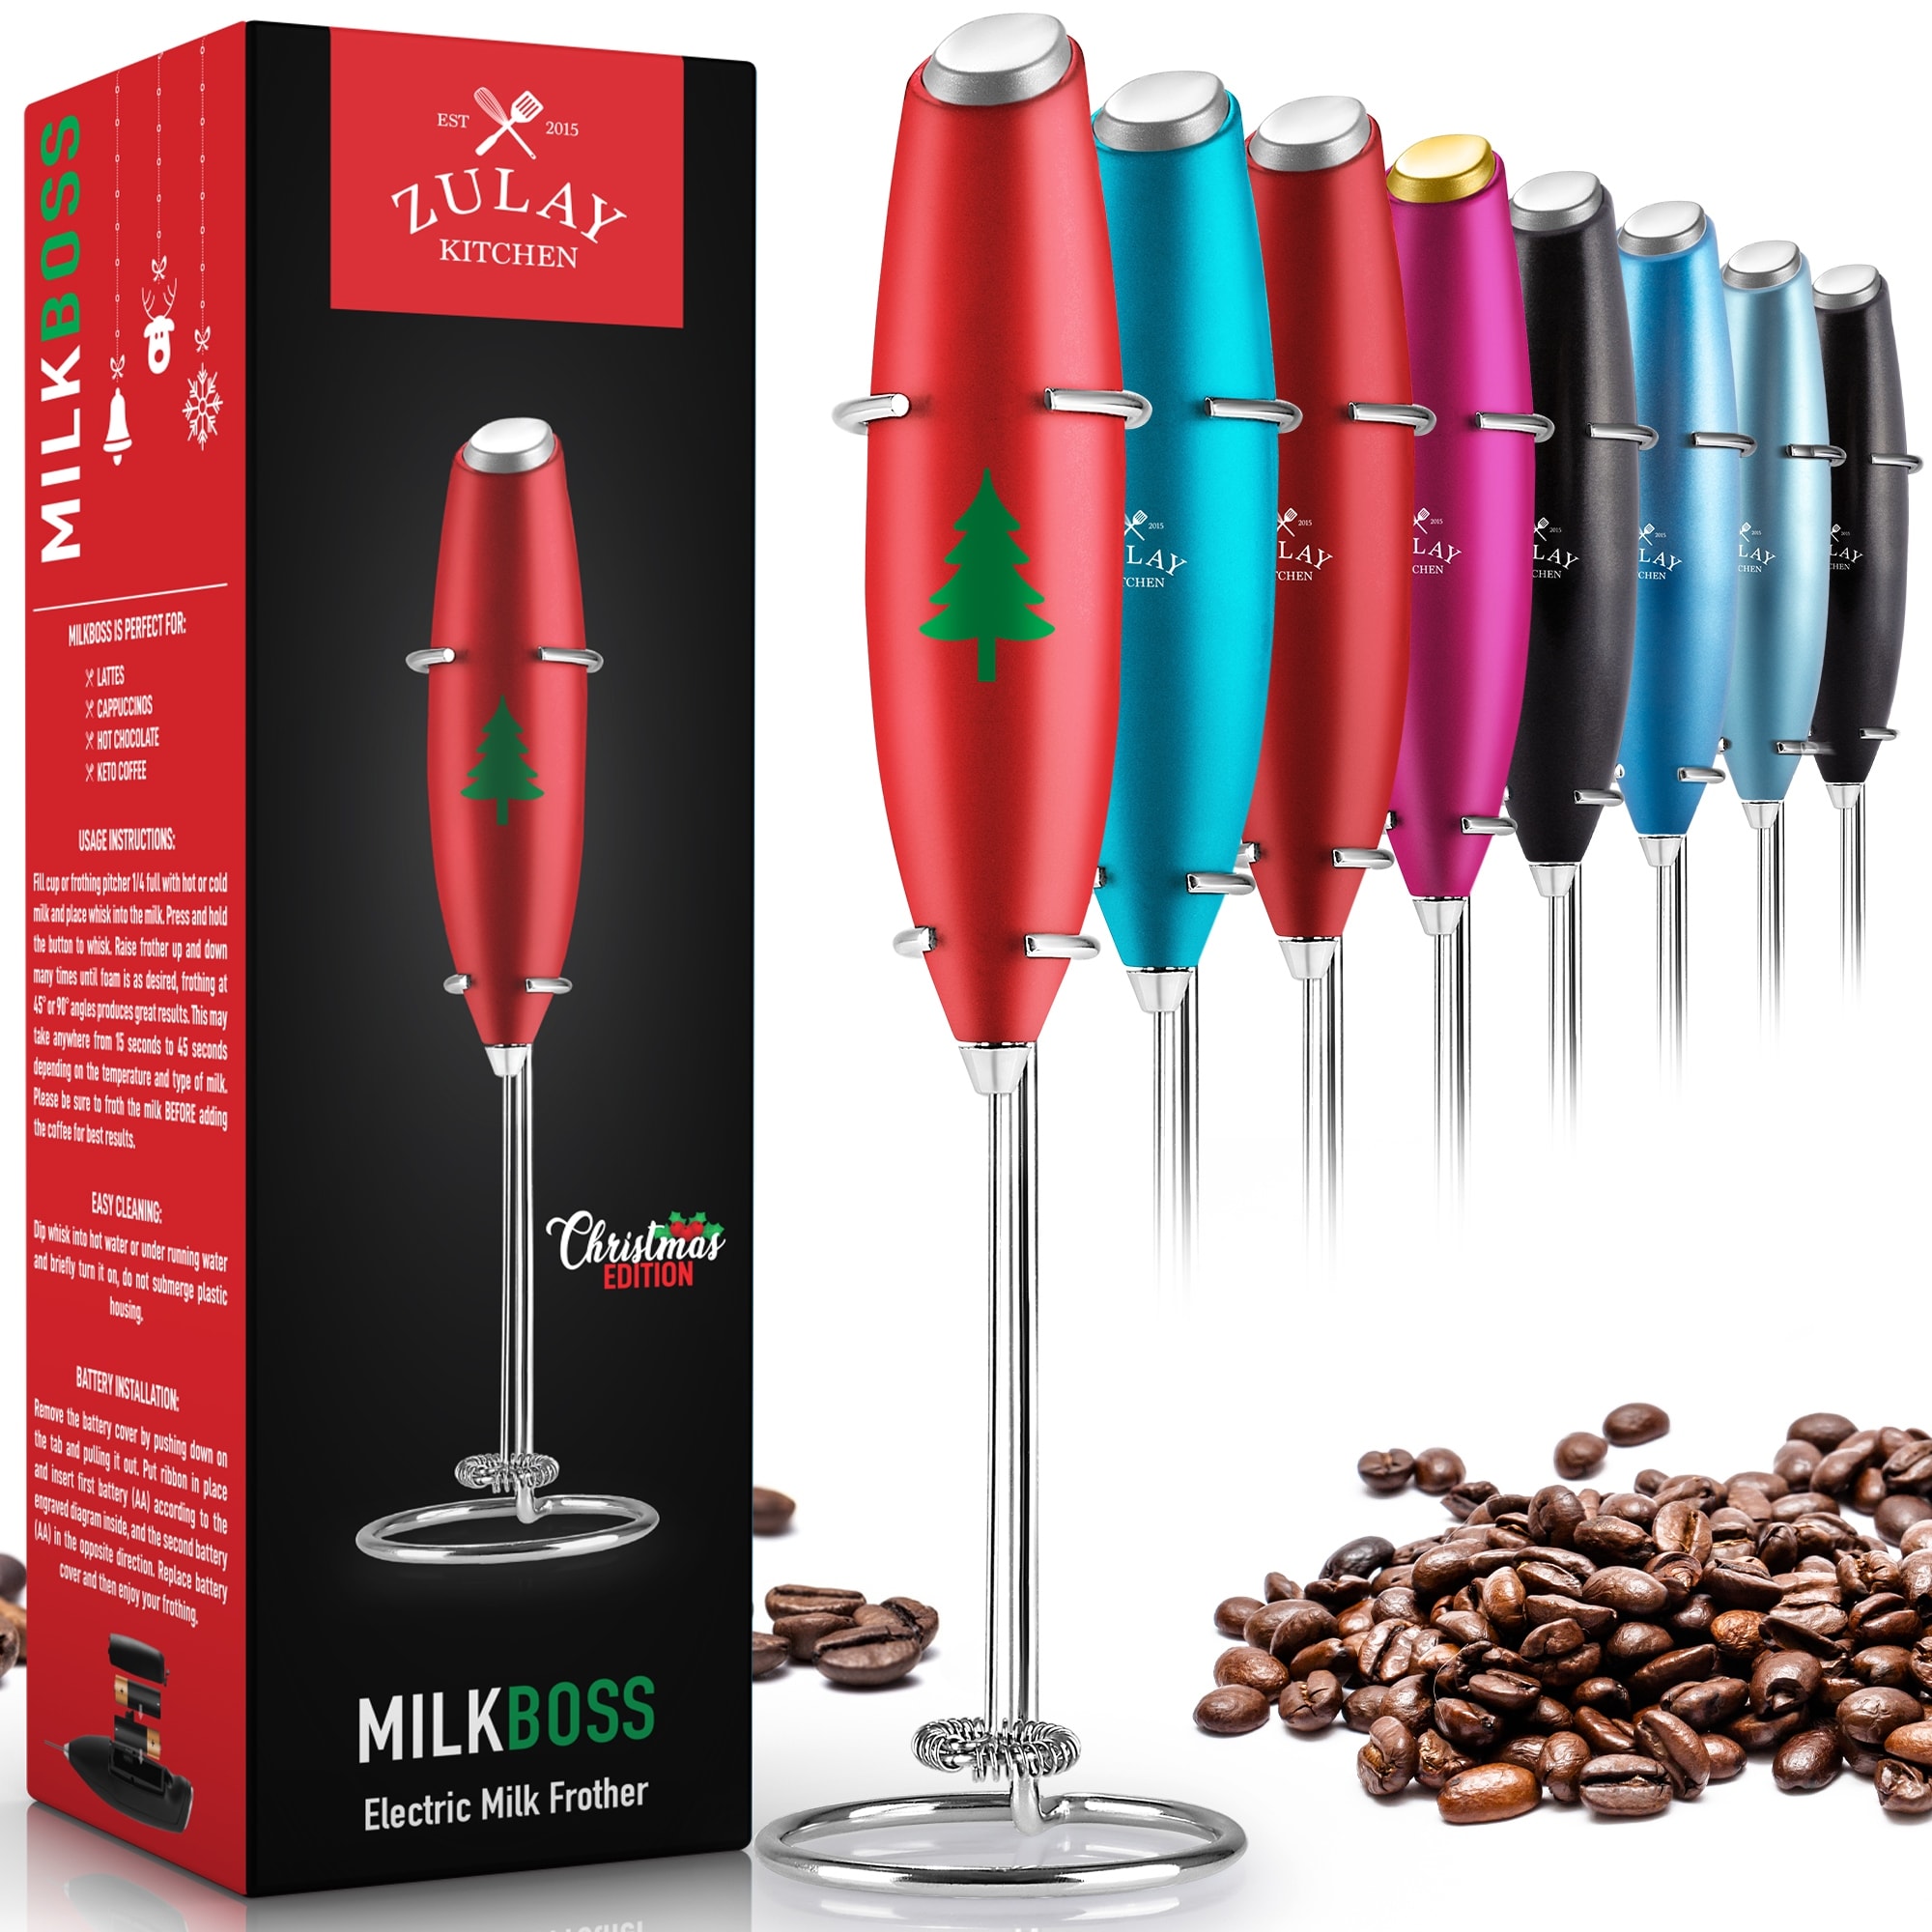 https://ak1.ostkcdn.com/images/products/is/images/direct/82c3641d1bad48db39e5716e8e52971f1161463a/Zulay-Kitchen-Milk-Frother-With-Stand-%28Christmas-Edition%29.jpg